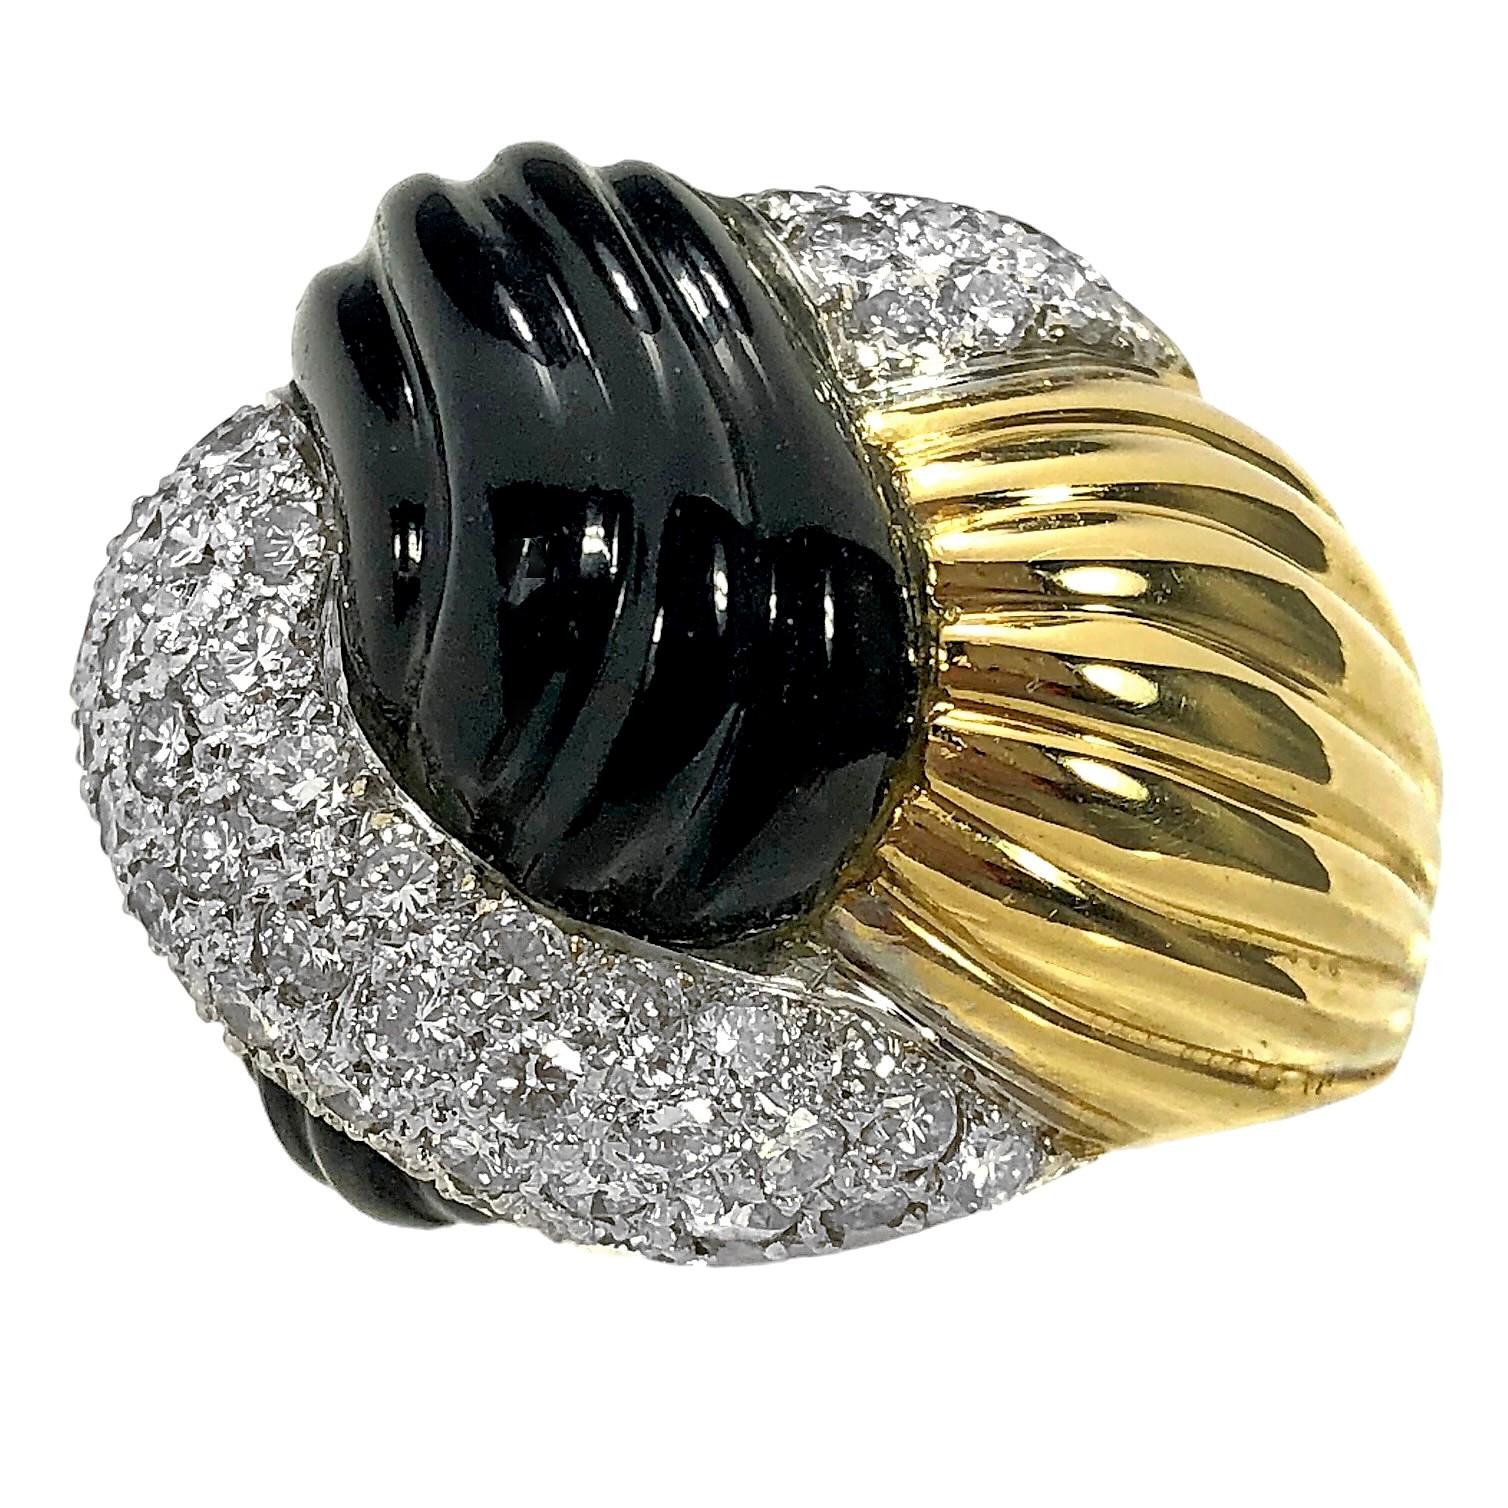 This pristine Late-20th Century ladies 18K yellow gold cocktail ring is designed as a large and striking knot. With all gold and onyx surfaces fluted and all diamonds set in rhodium plates, the effect is powerful. Total approximate diamond weight is